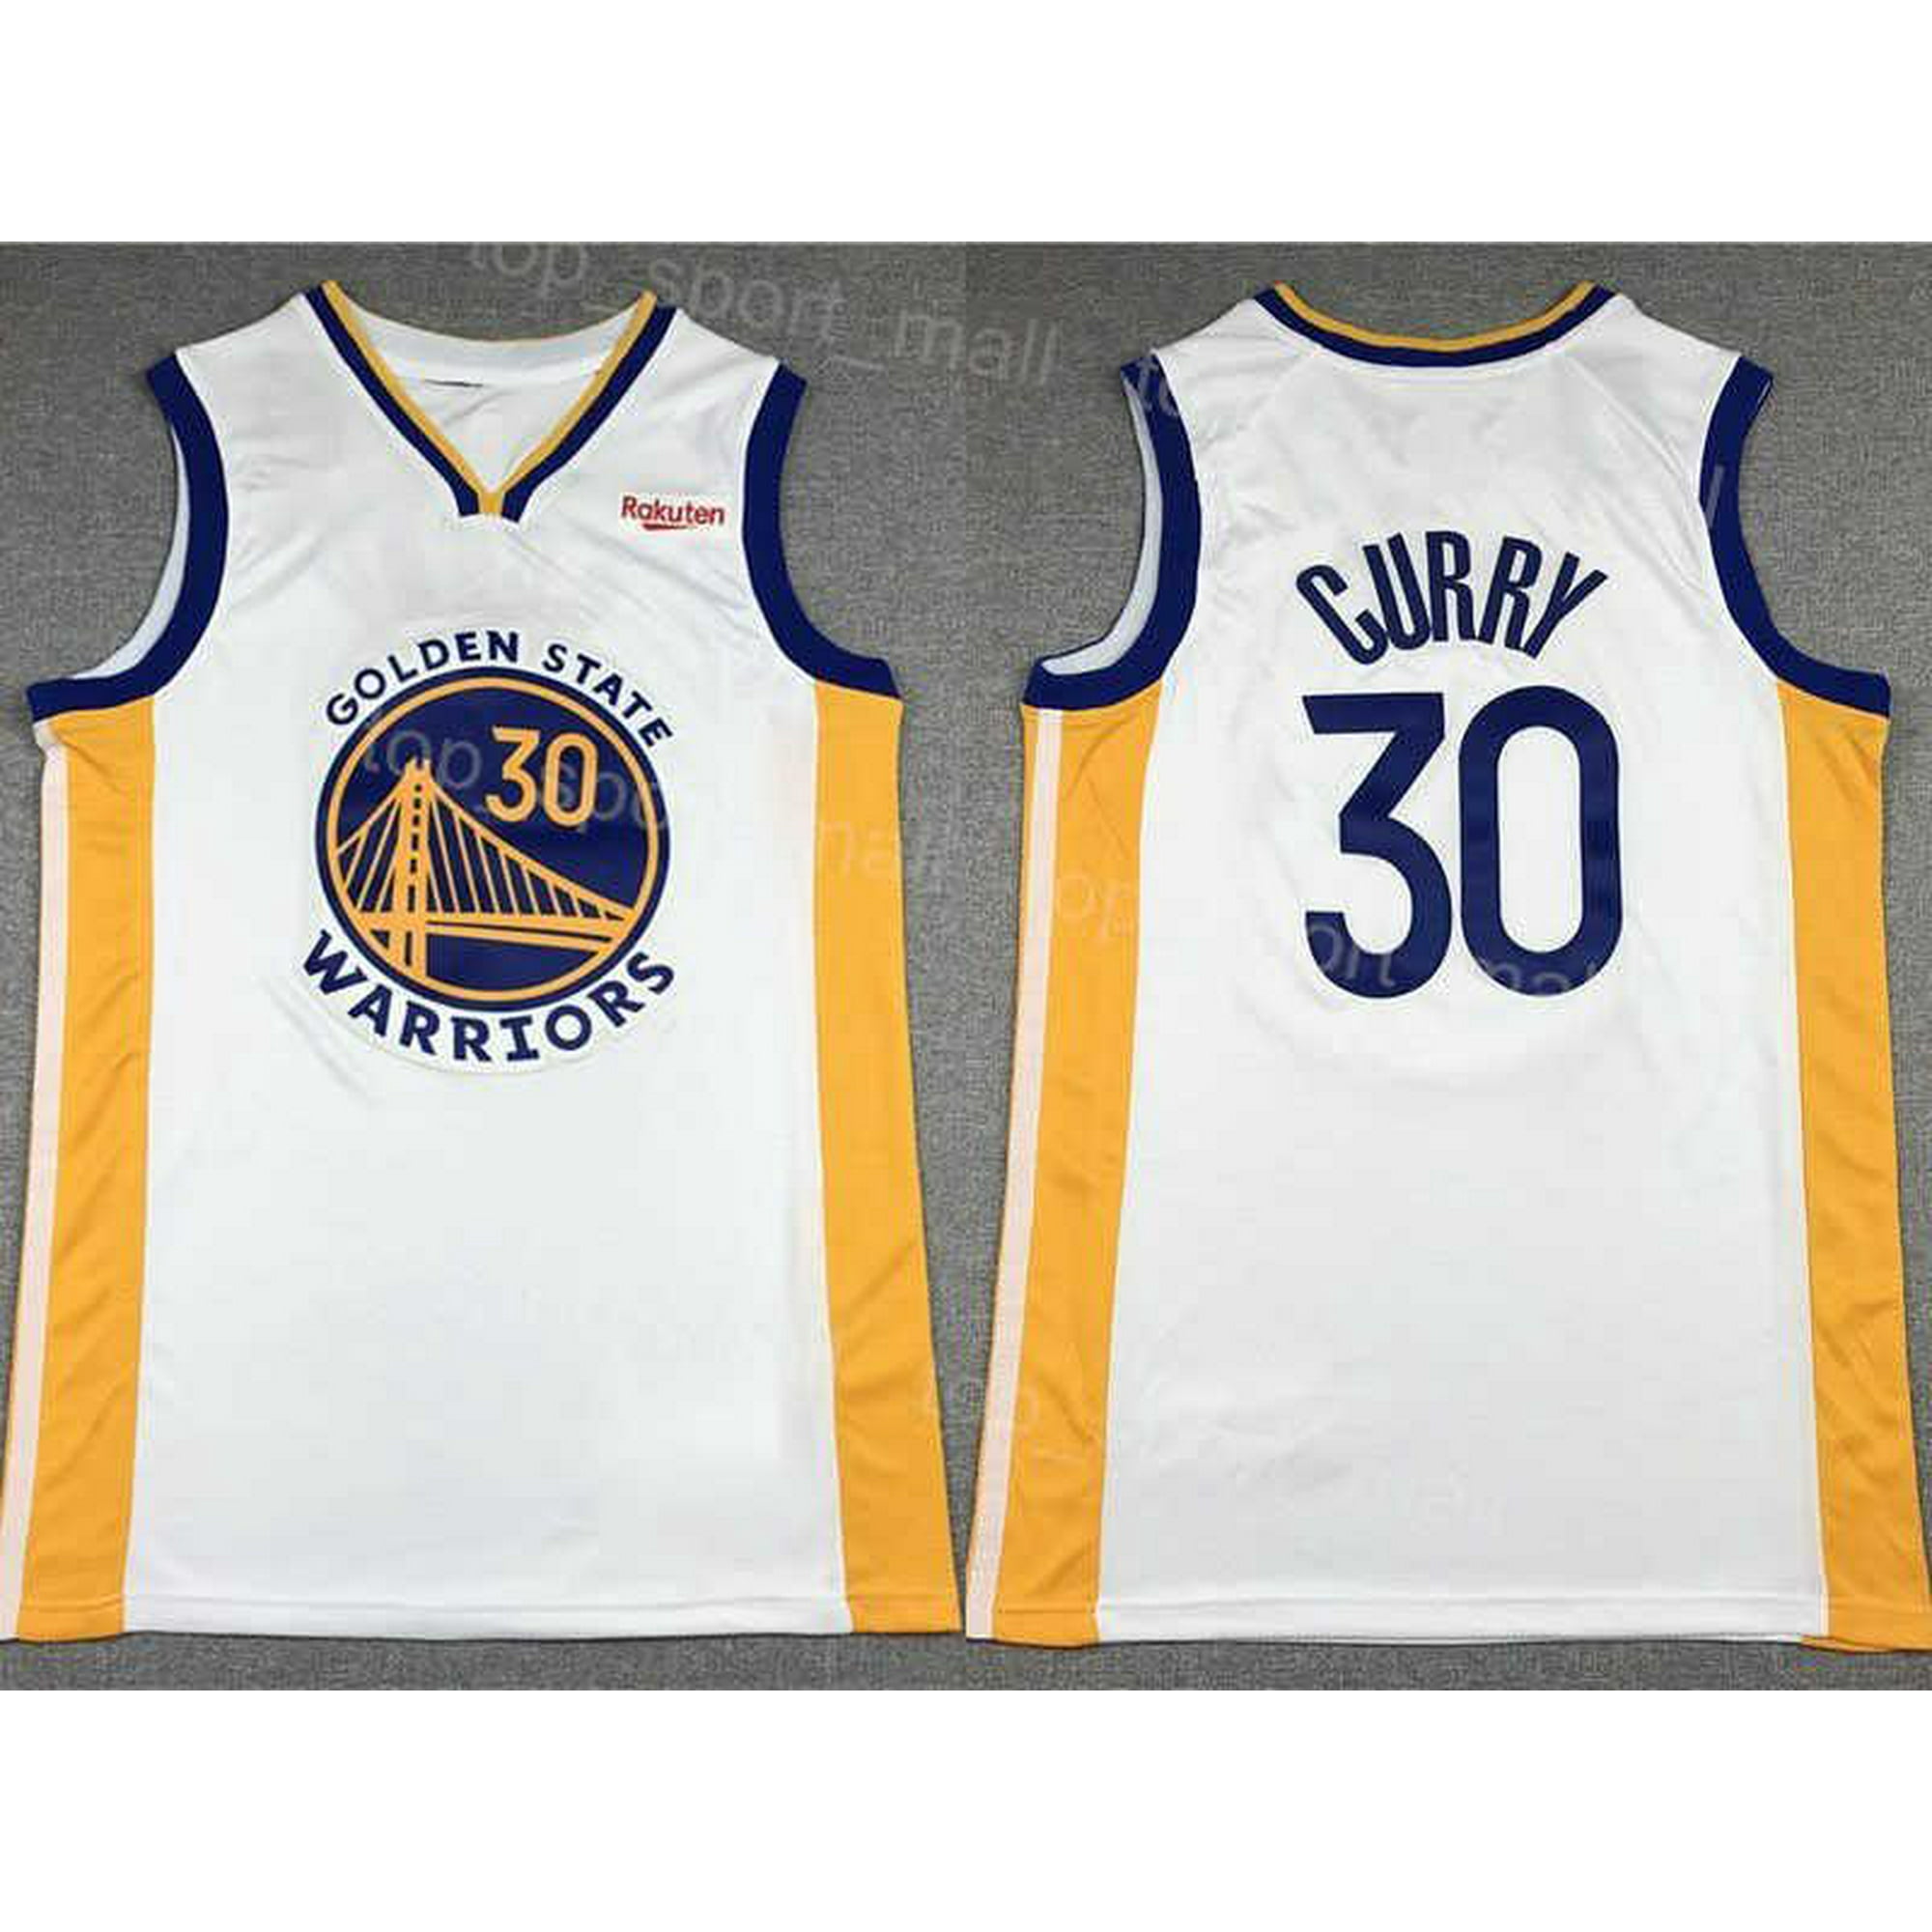 Golden State Warriors Icon Black Gold Jersey - All Stitched